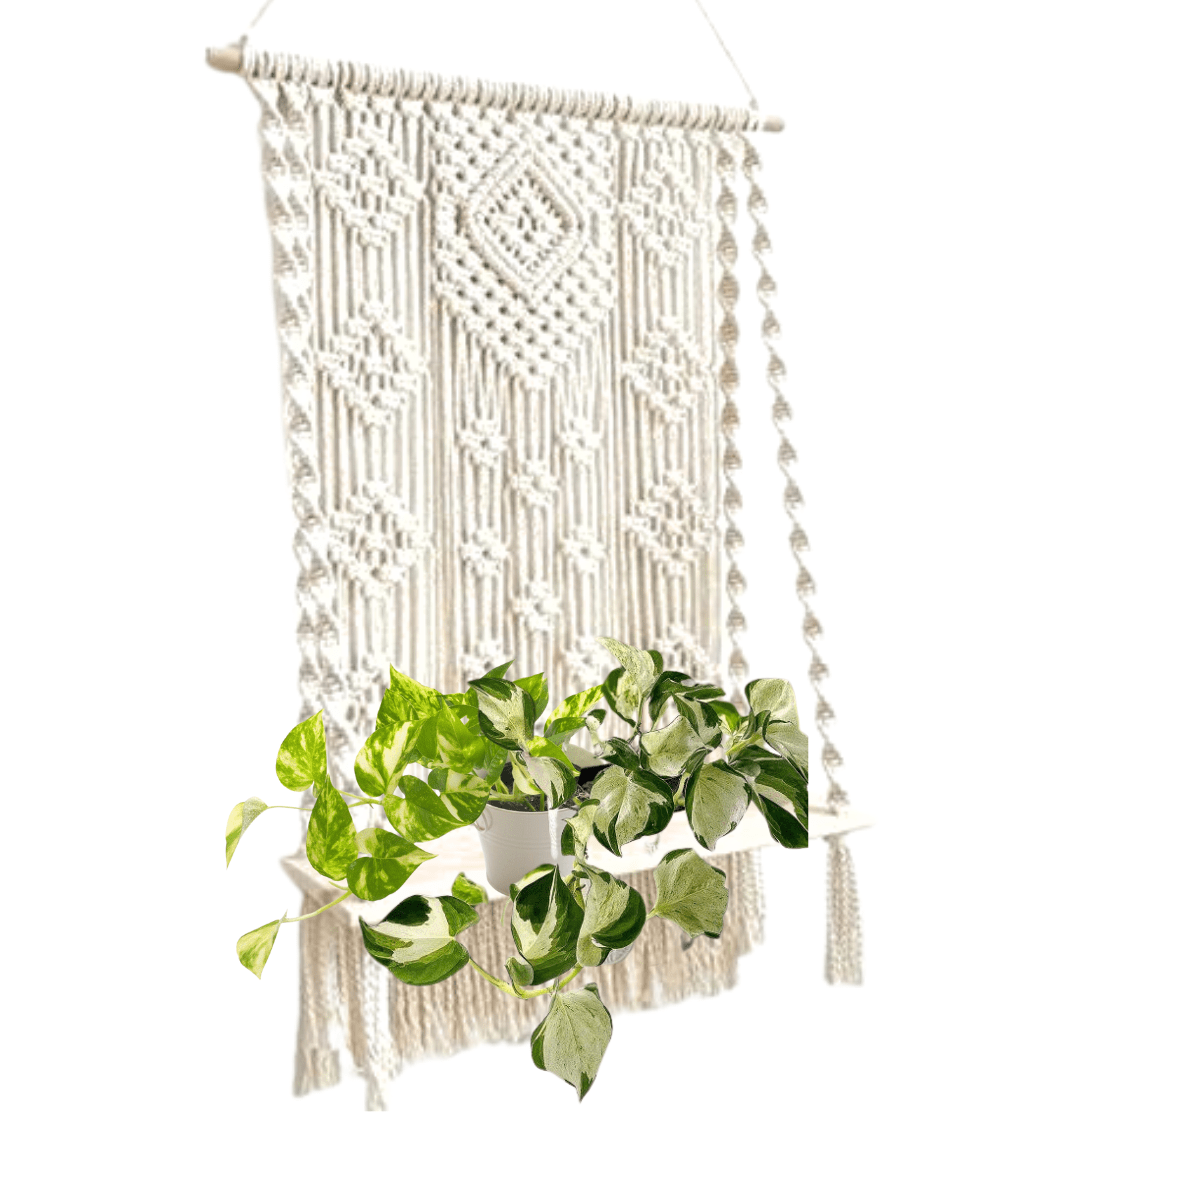 Macrame Curtain Selves with White and Golden Variegated Pothos, Home Decoration